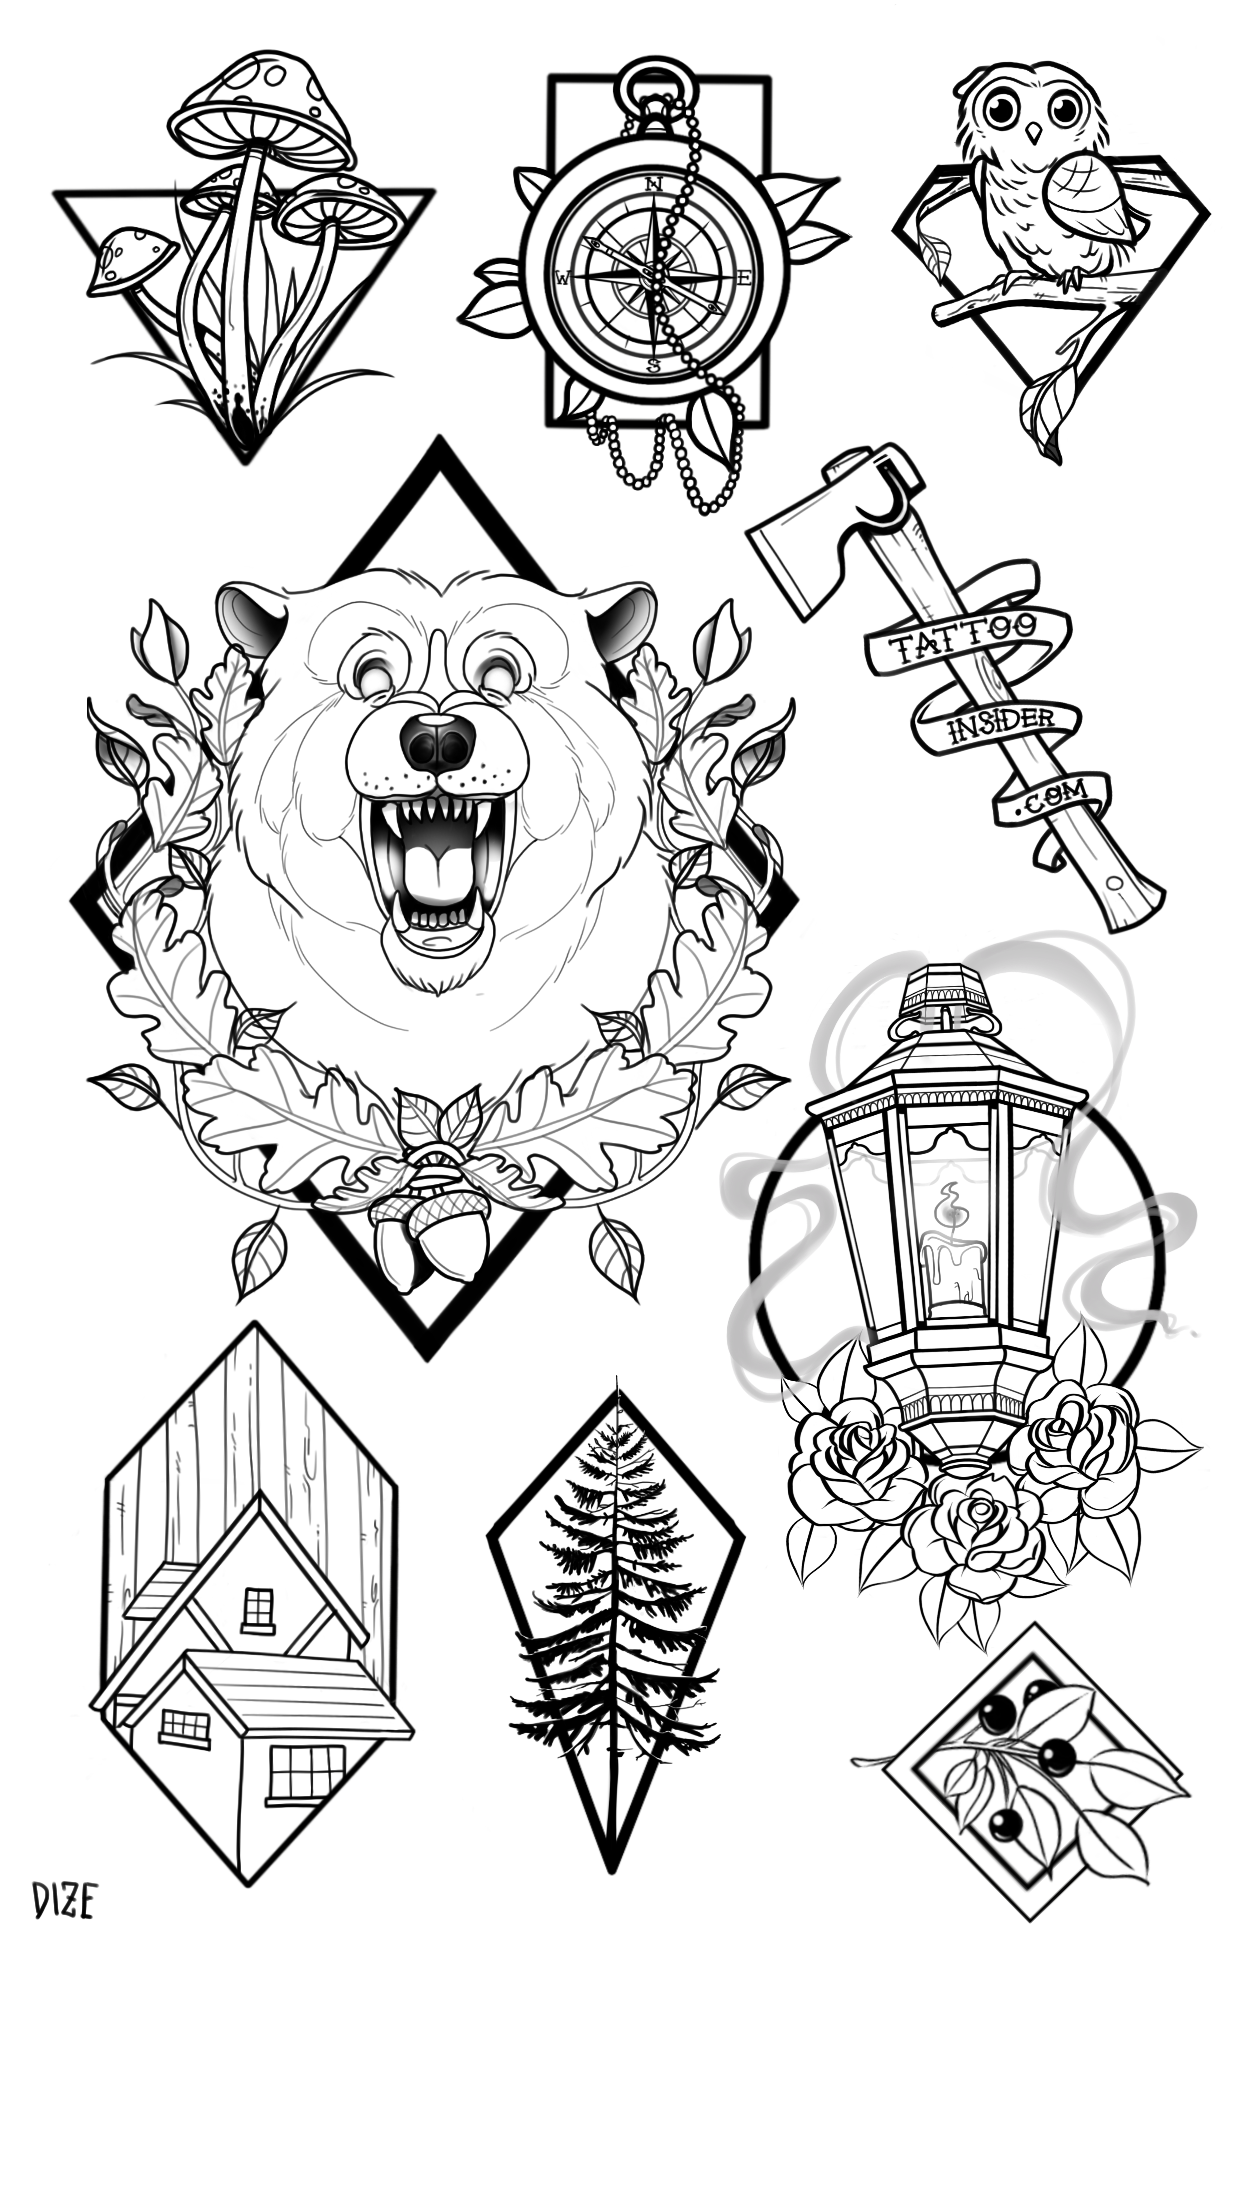 Forest Tattoo Design Ideas And Meaning